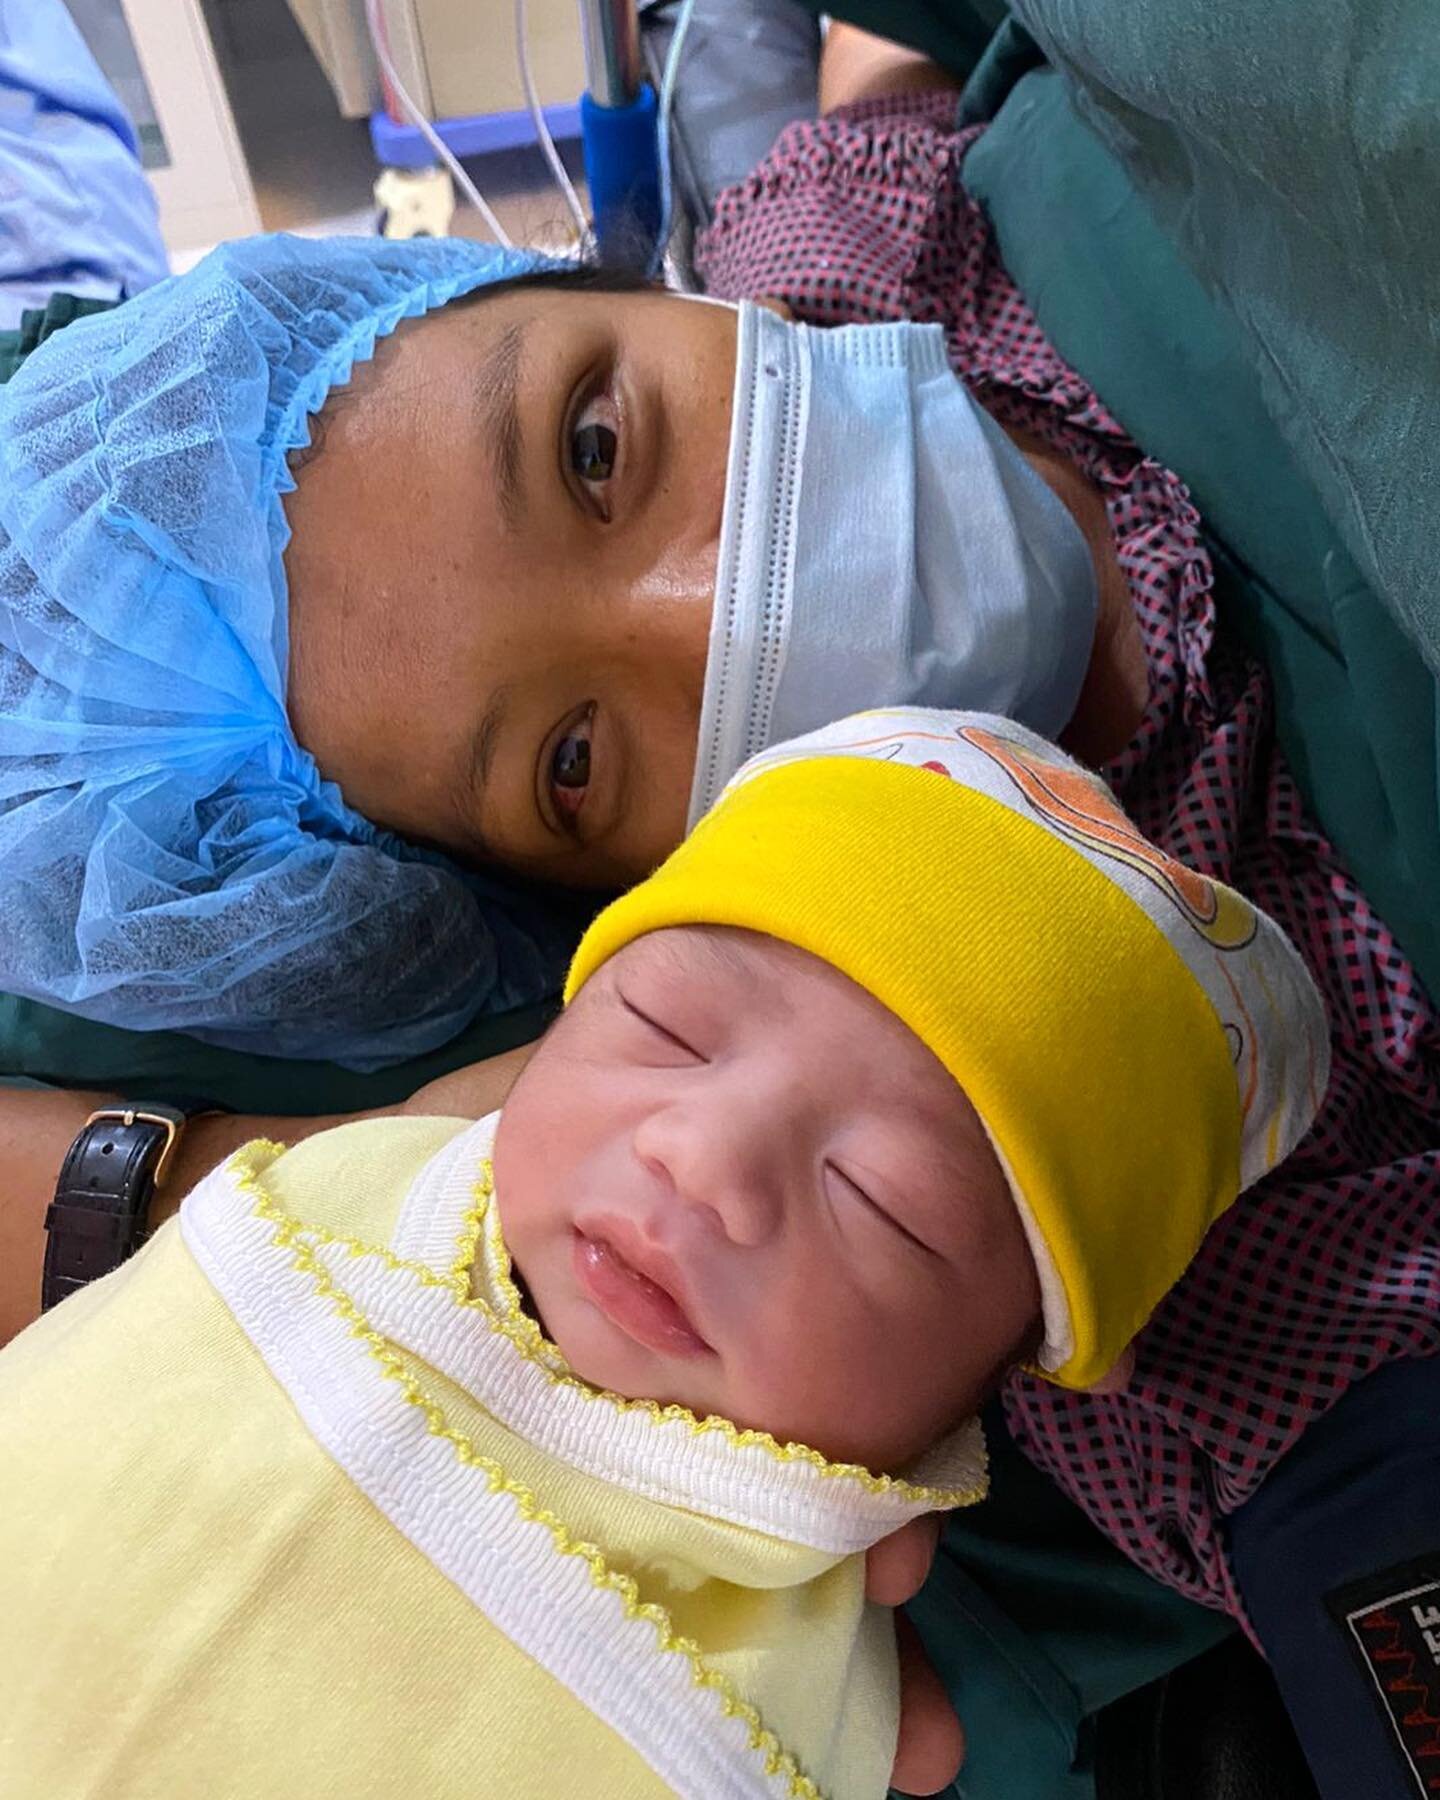 A Little Star is born &amp; the world just got Brighter!☀️⭐️💫🌟🥰

Congratulations Dr Rany &amp; Mr Angkea on the newest arrival of your beautiful little bundle of joy - Baby Anna Grace!😍

As Executive Director of @wahfoundation Dr Rany is an inspi